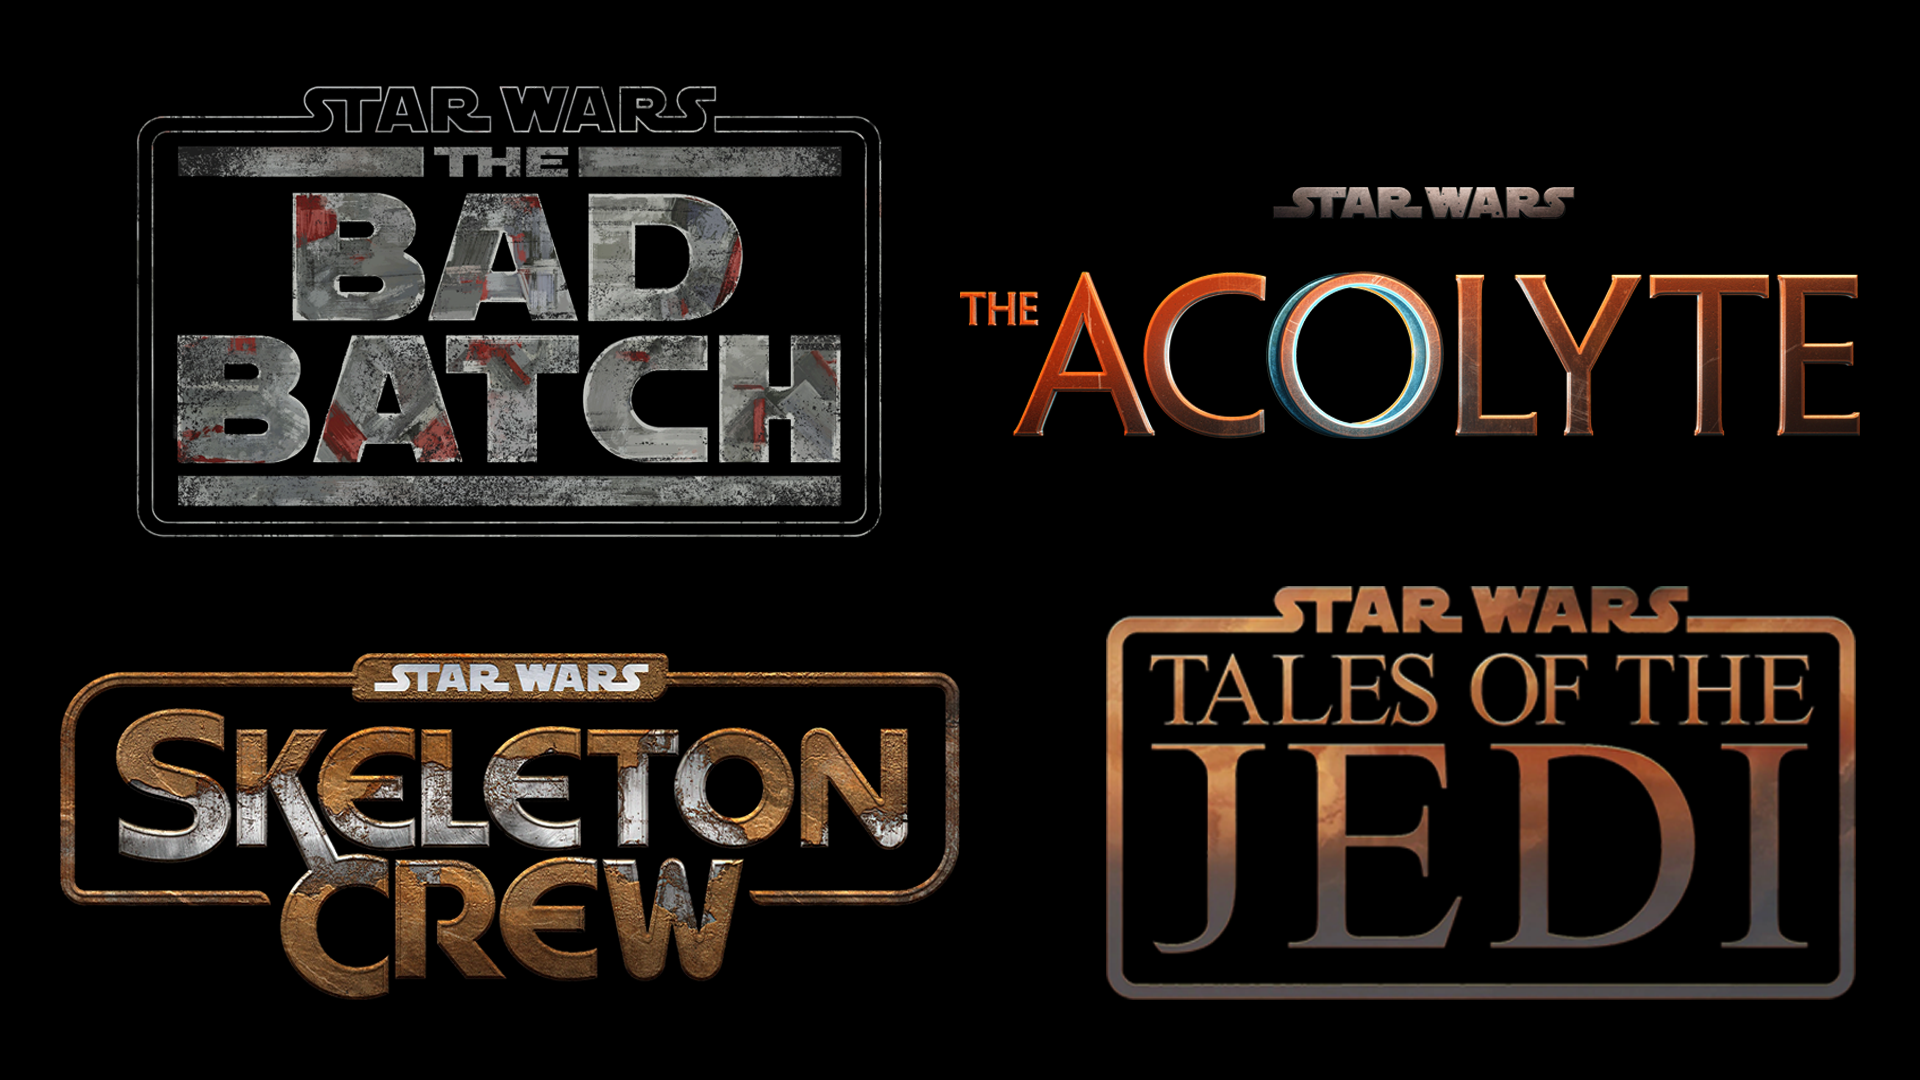 UPDATED 'The Bad Batch' Season 3 and 'Tales of the Jedi' Season 2